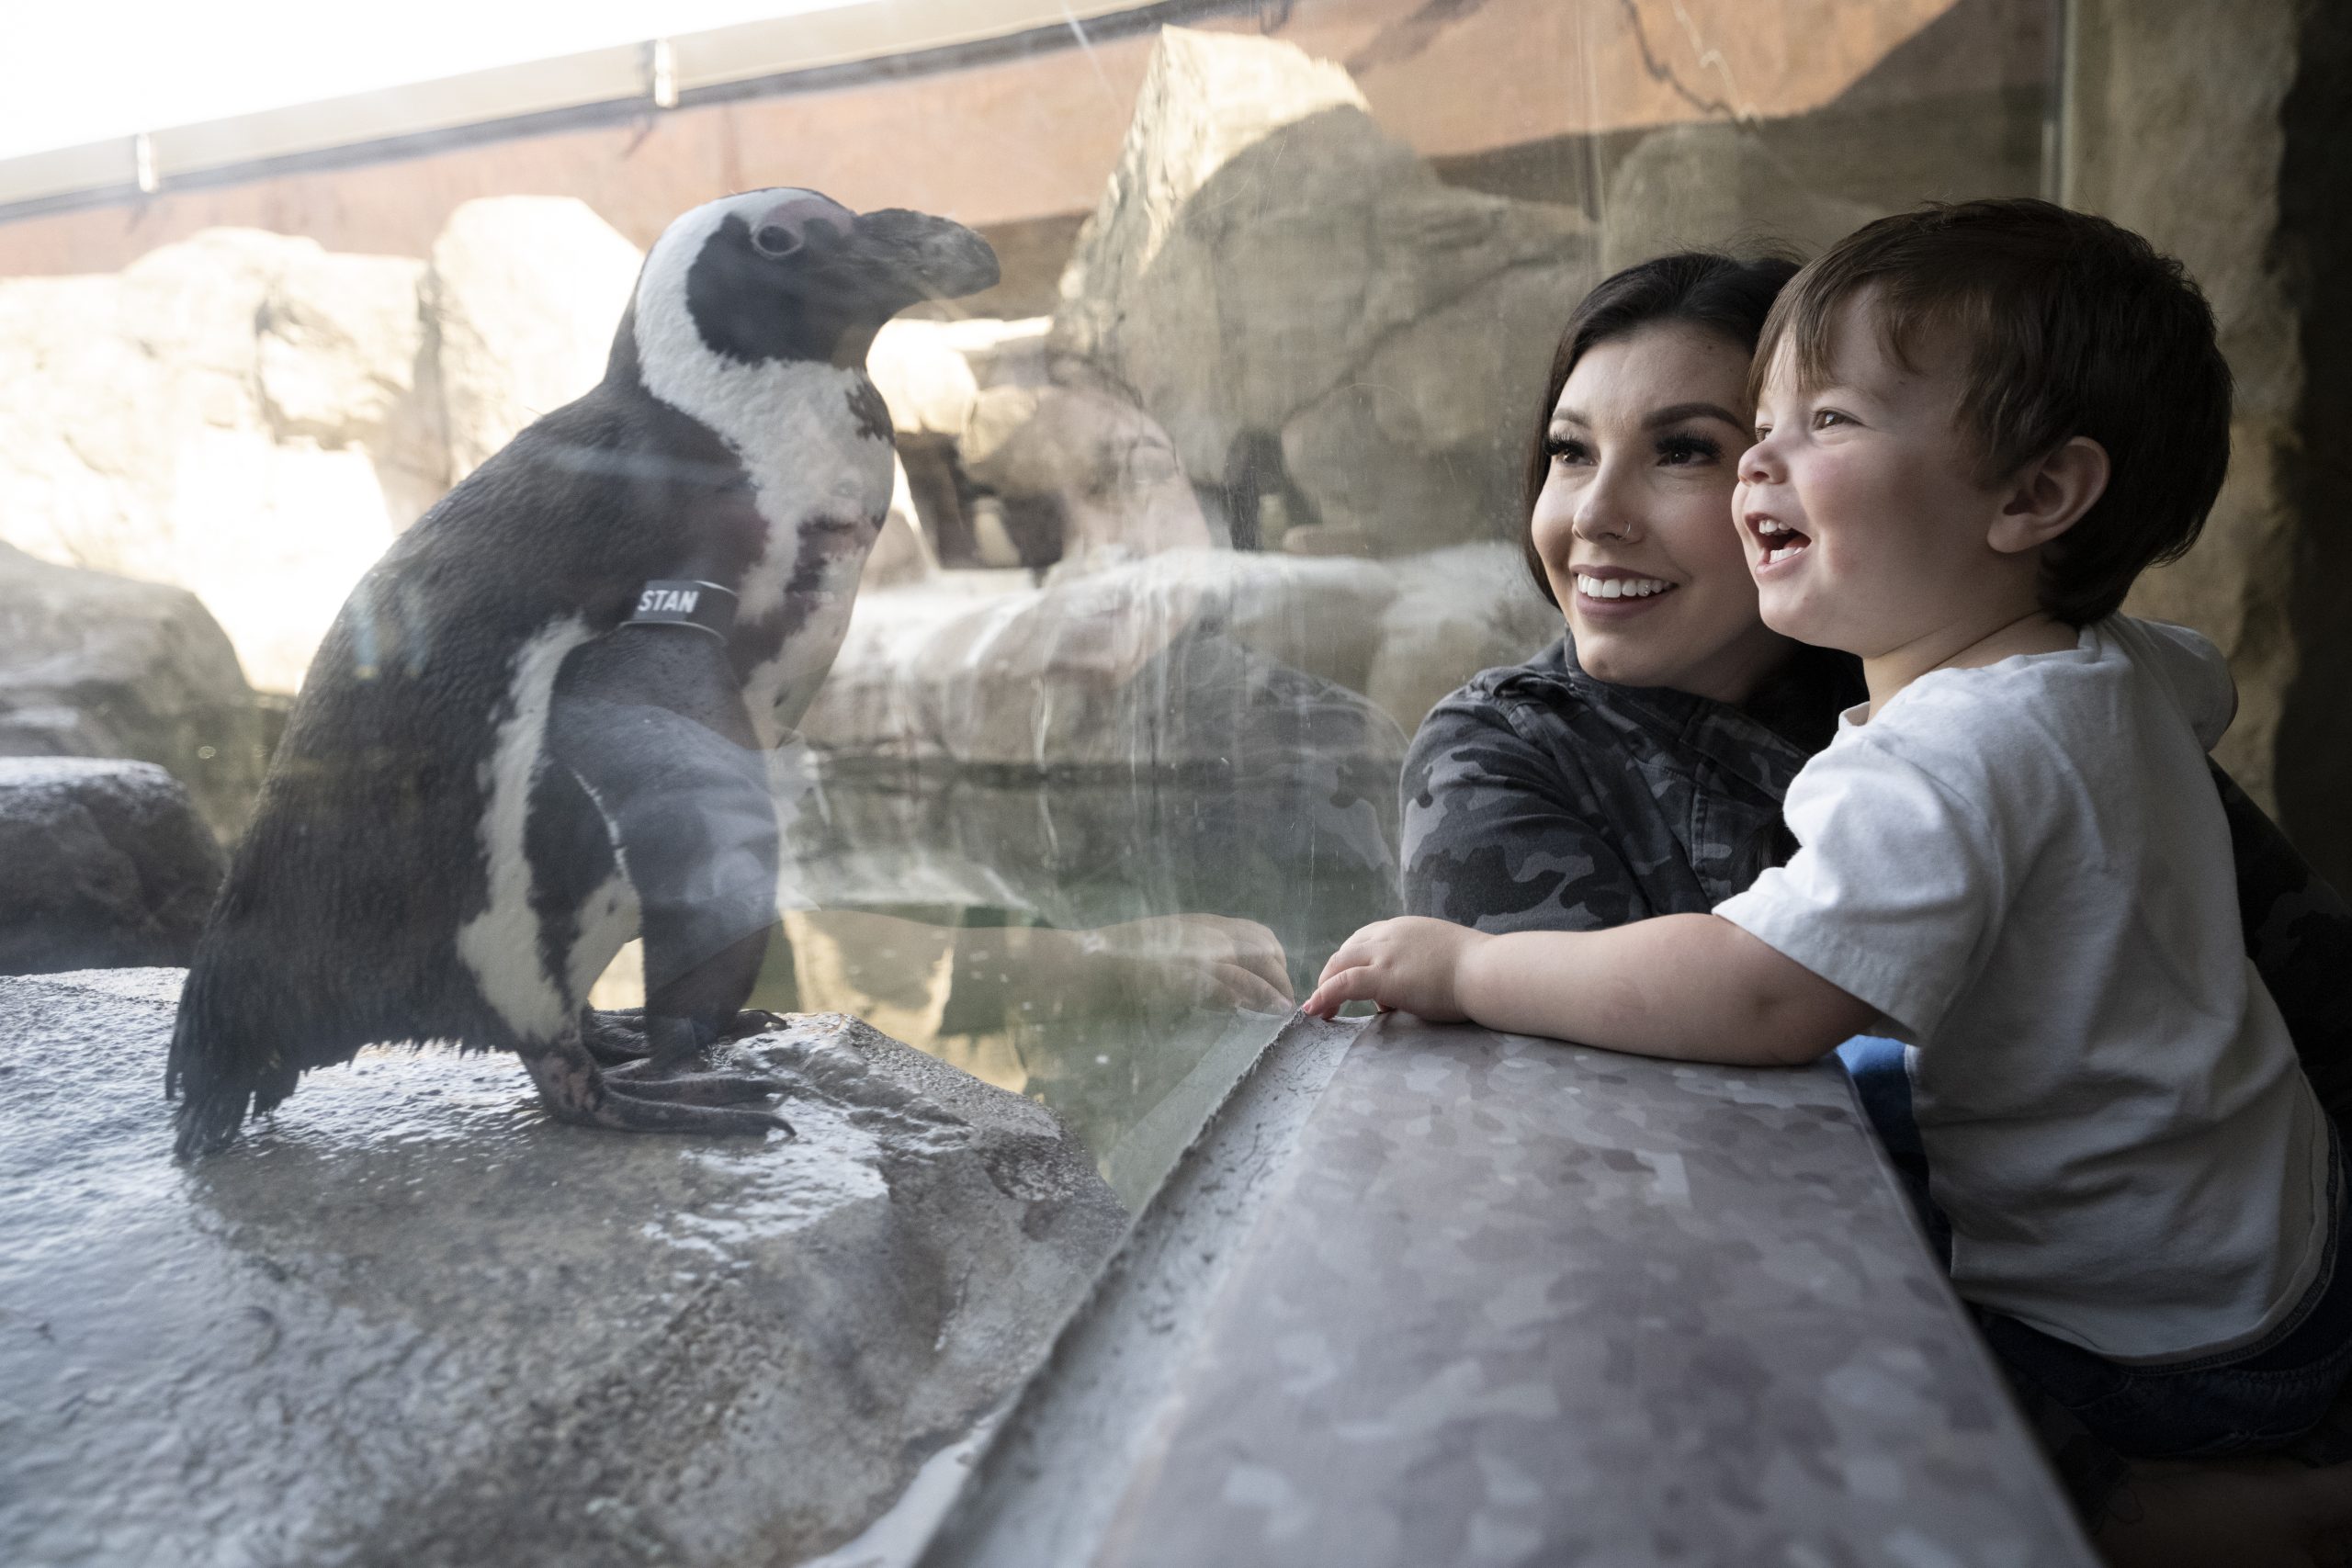 A woman and child smiling looking at an African Penguin up close